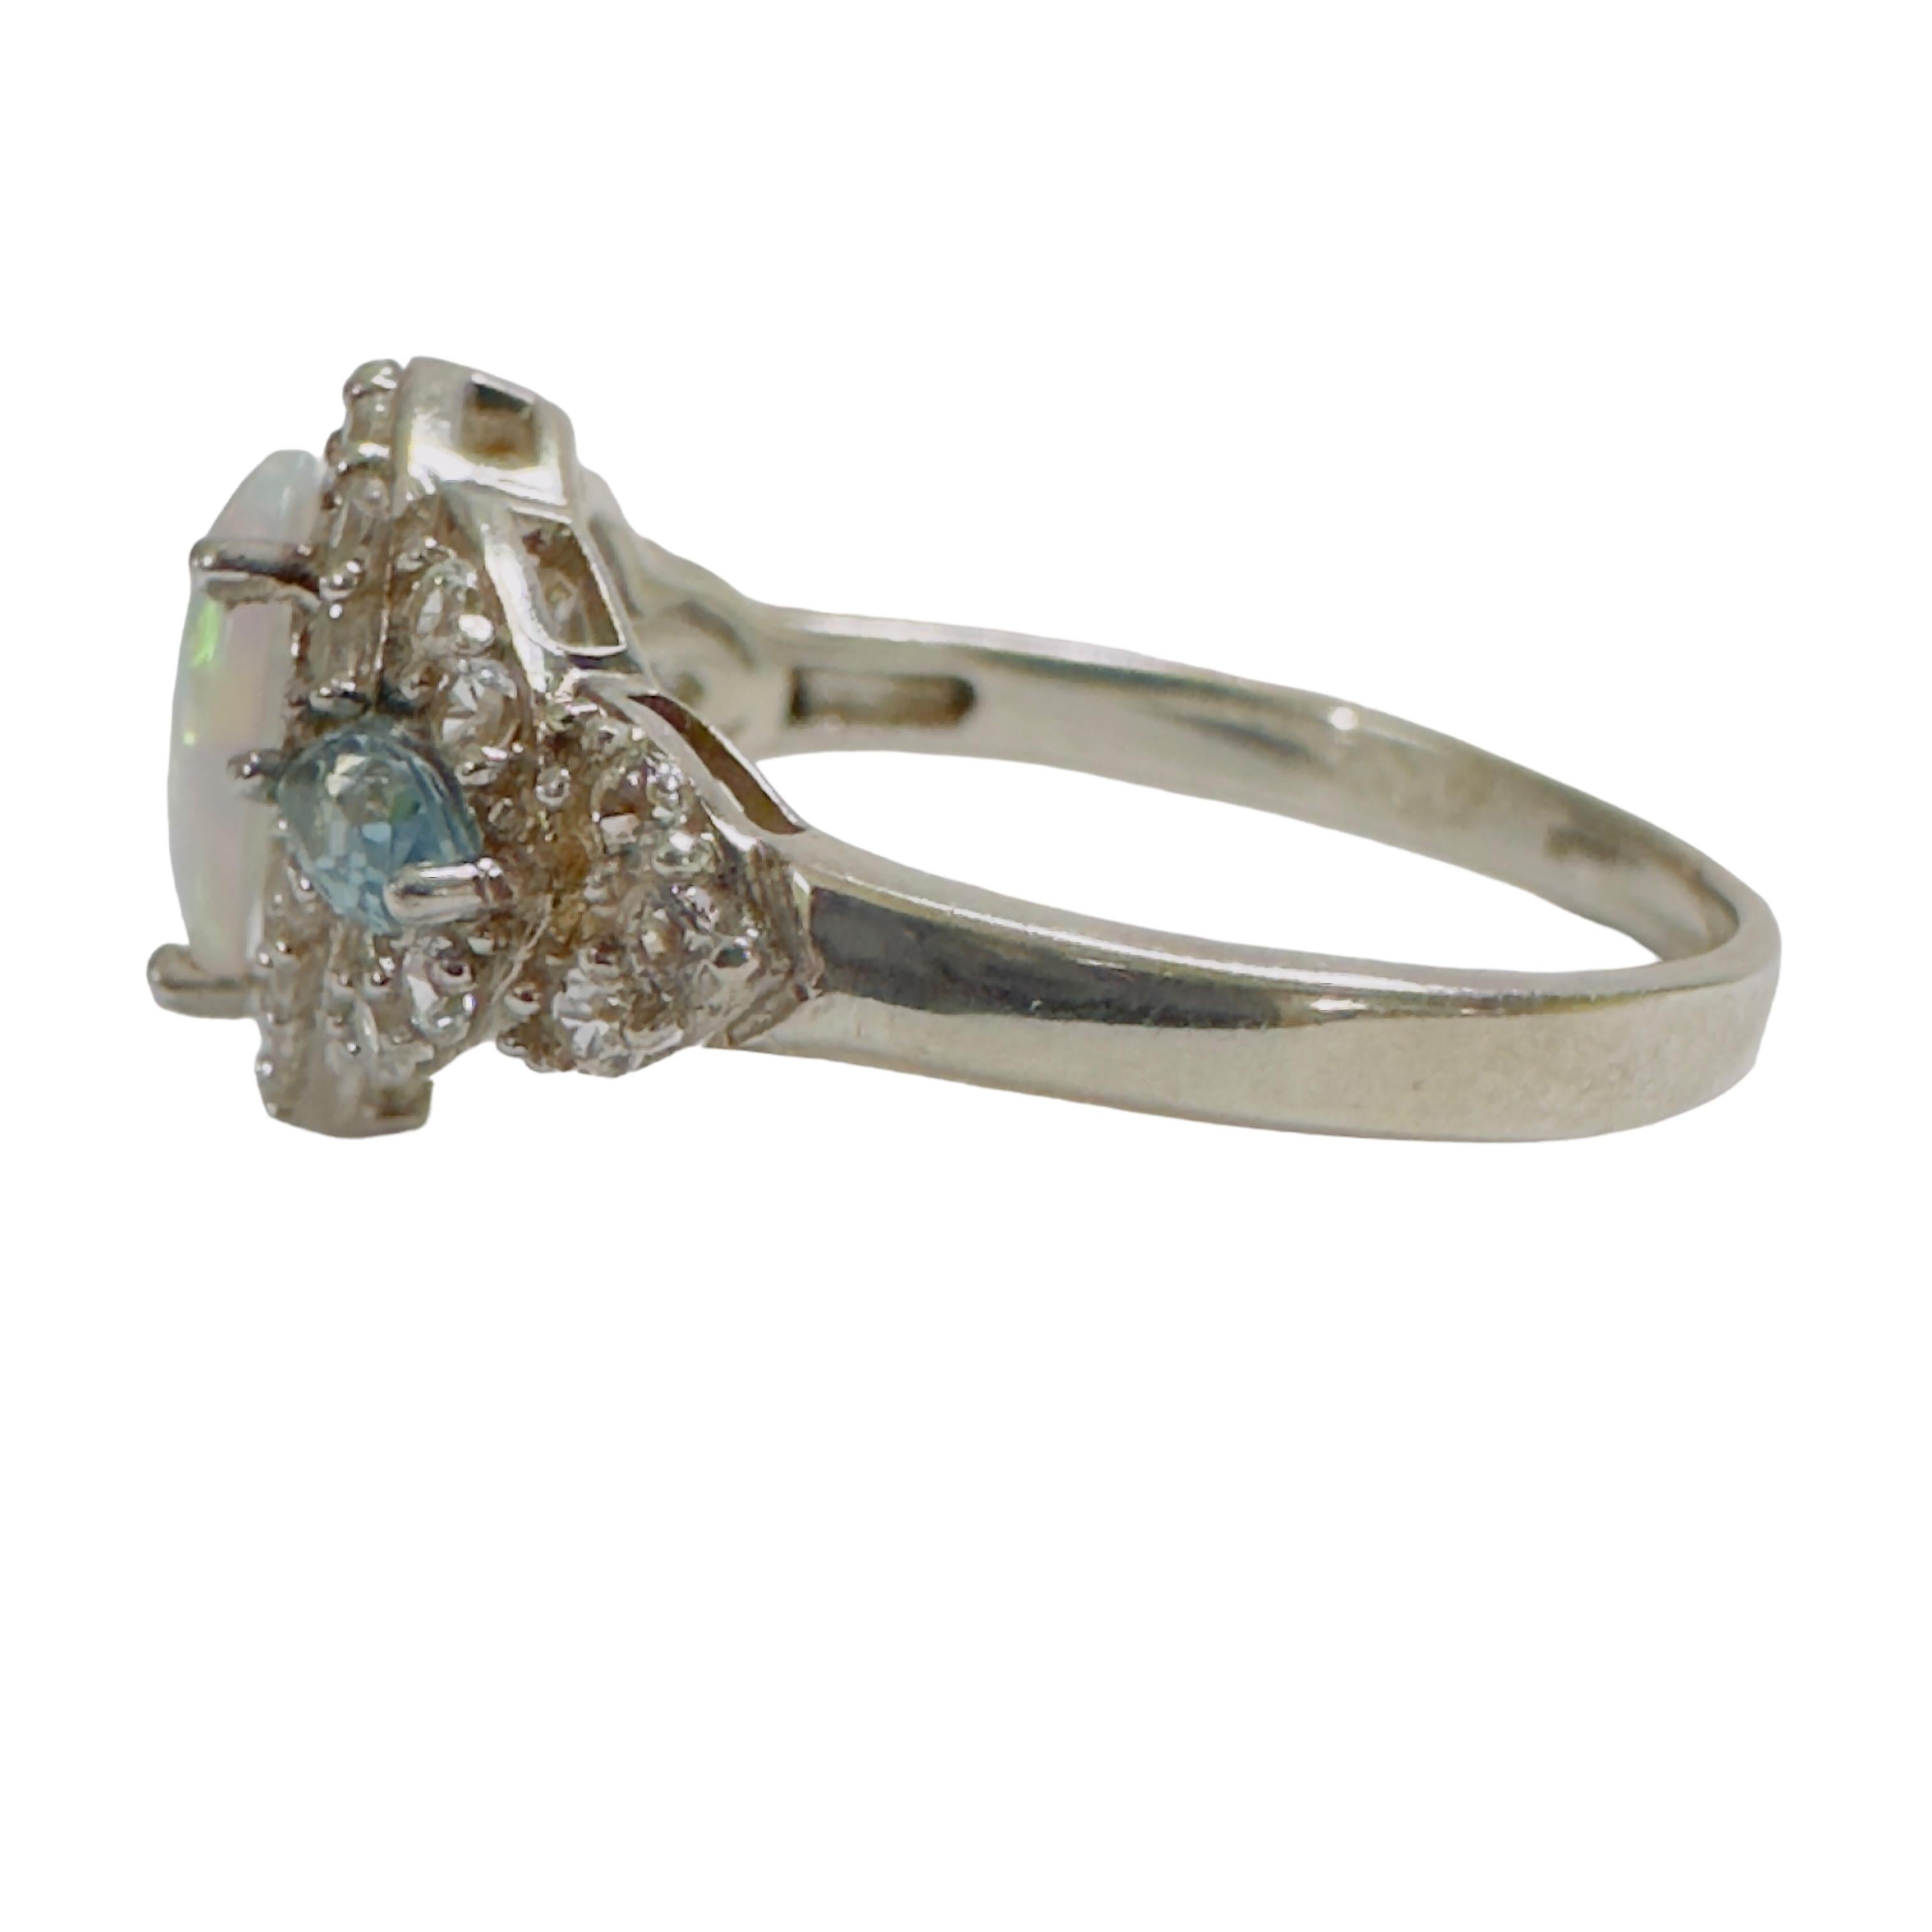 Pear Cut Opal, Topaz and Sapphire Sterling Silver Ring Size 7.75